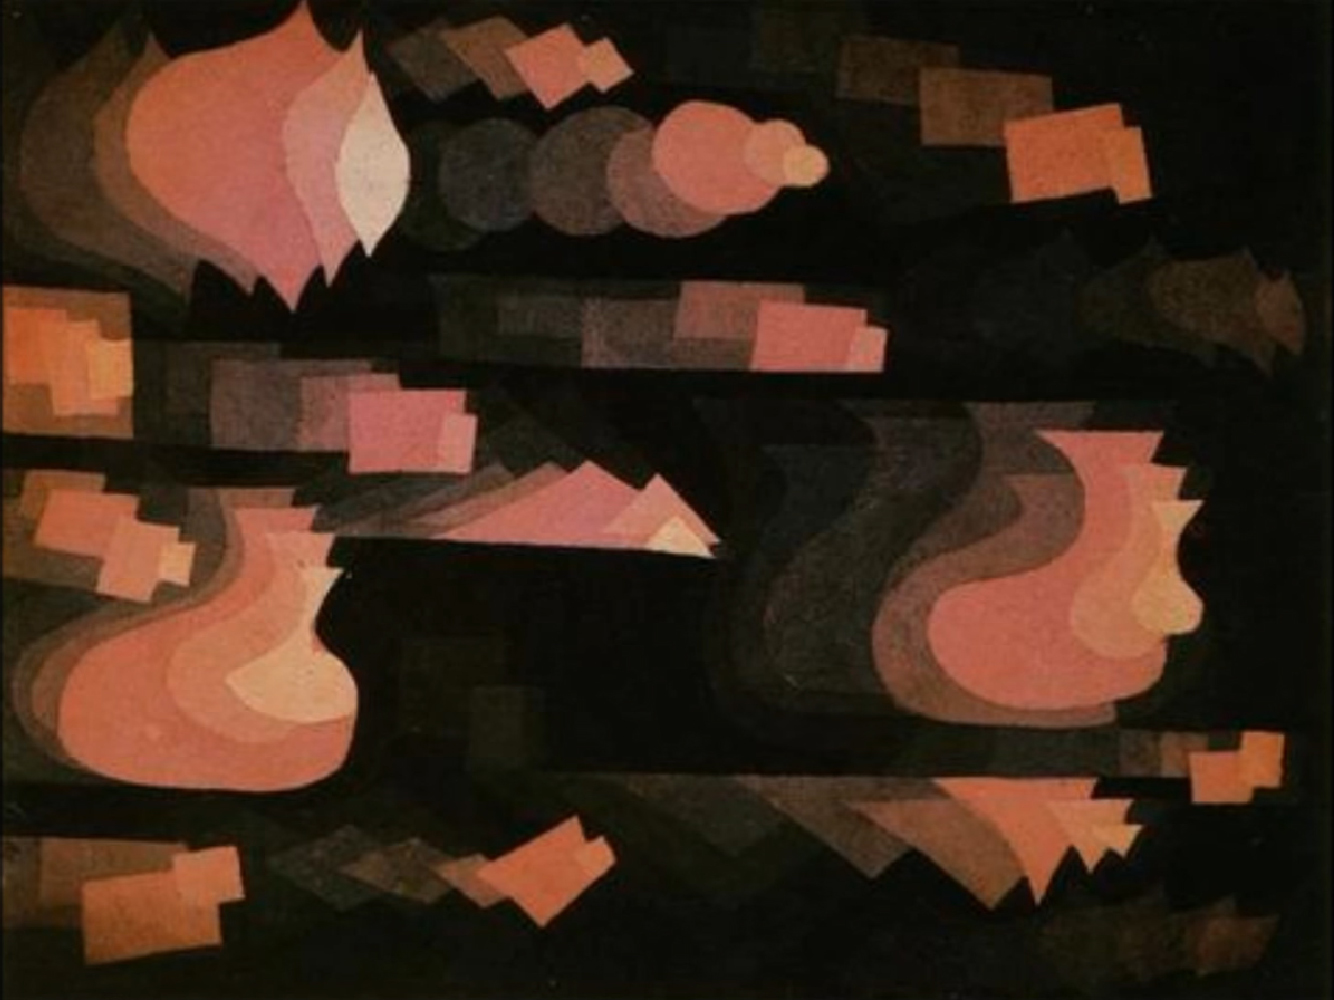 Fugue in Rot, Paul Klee, 1921